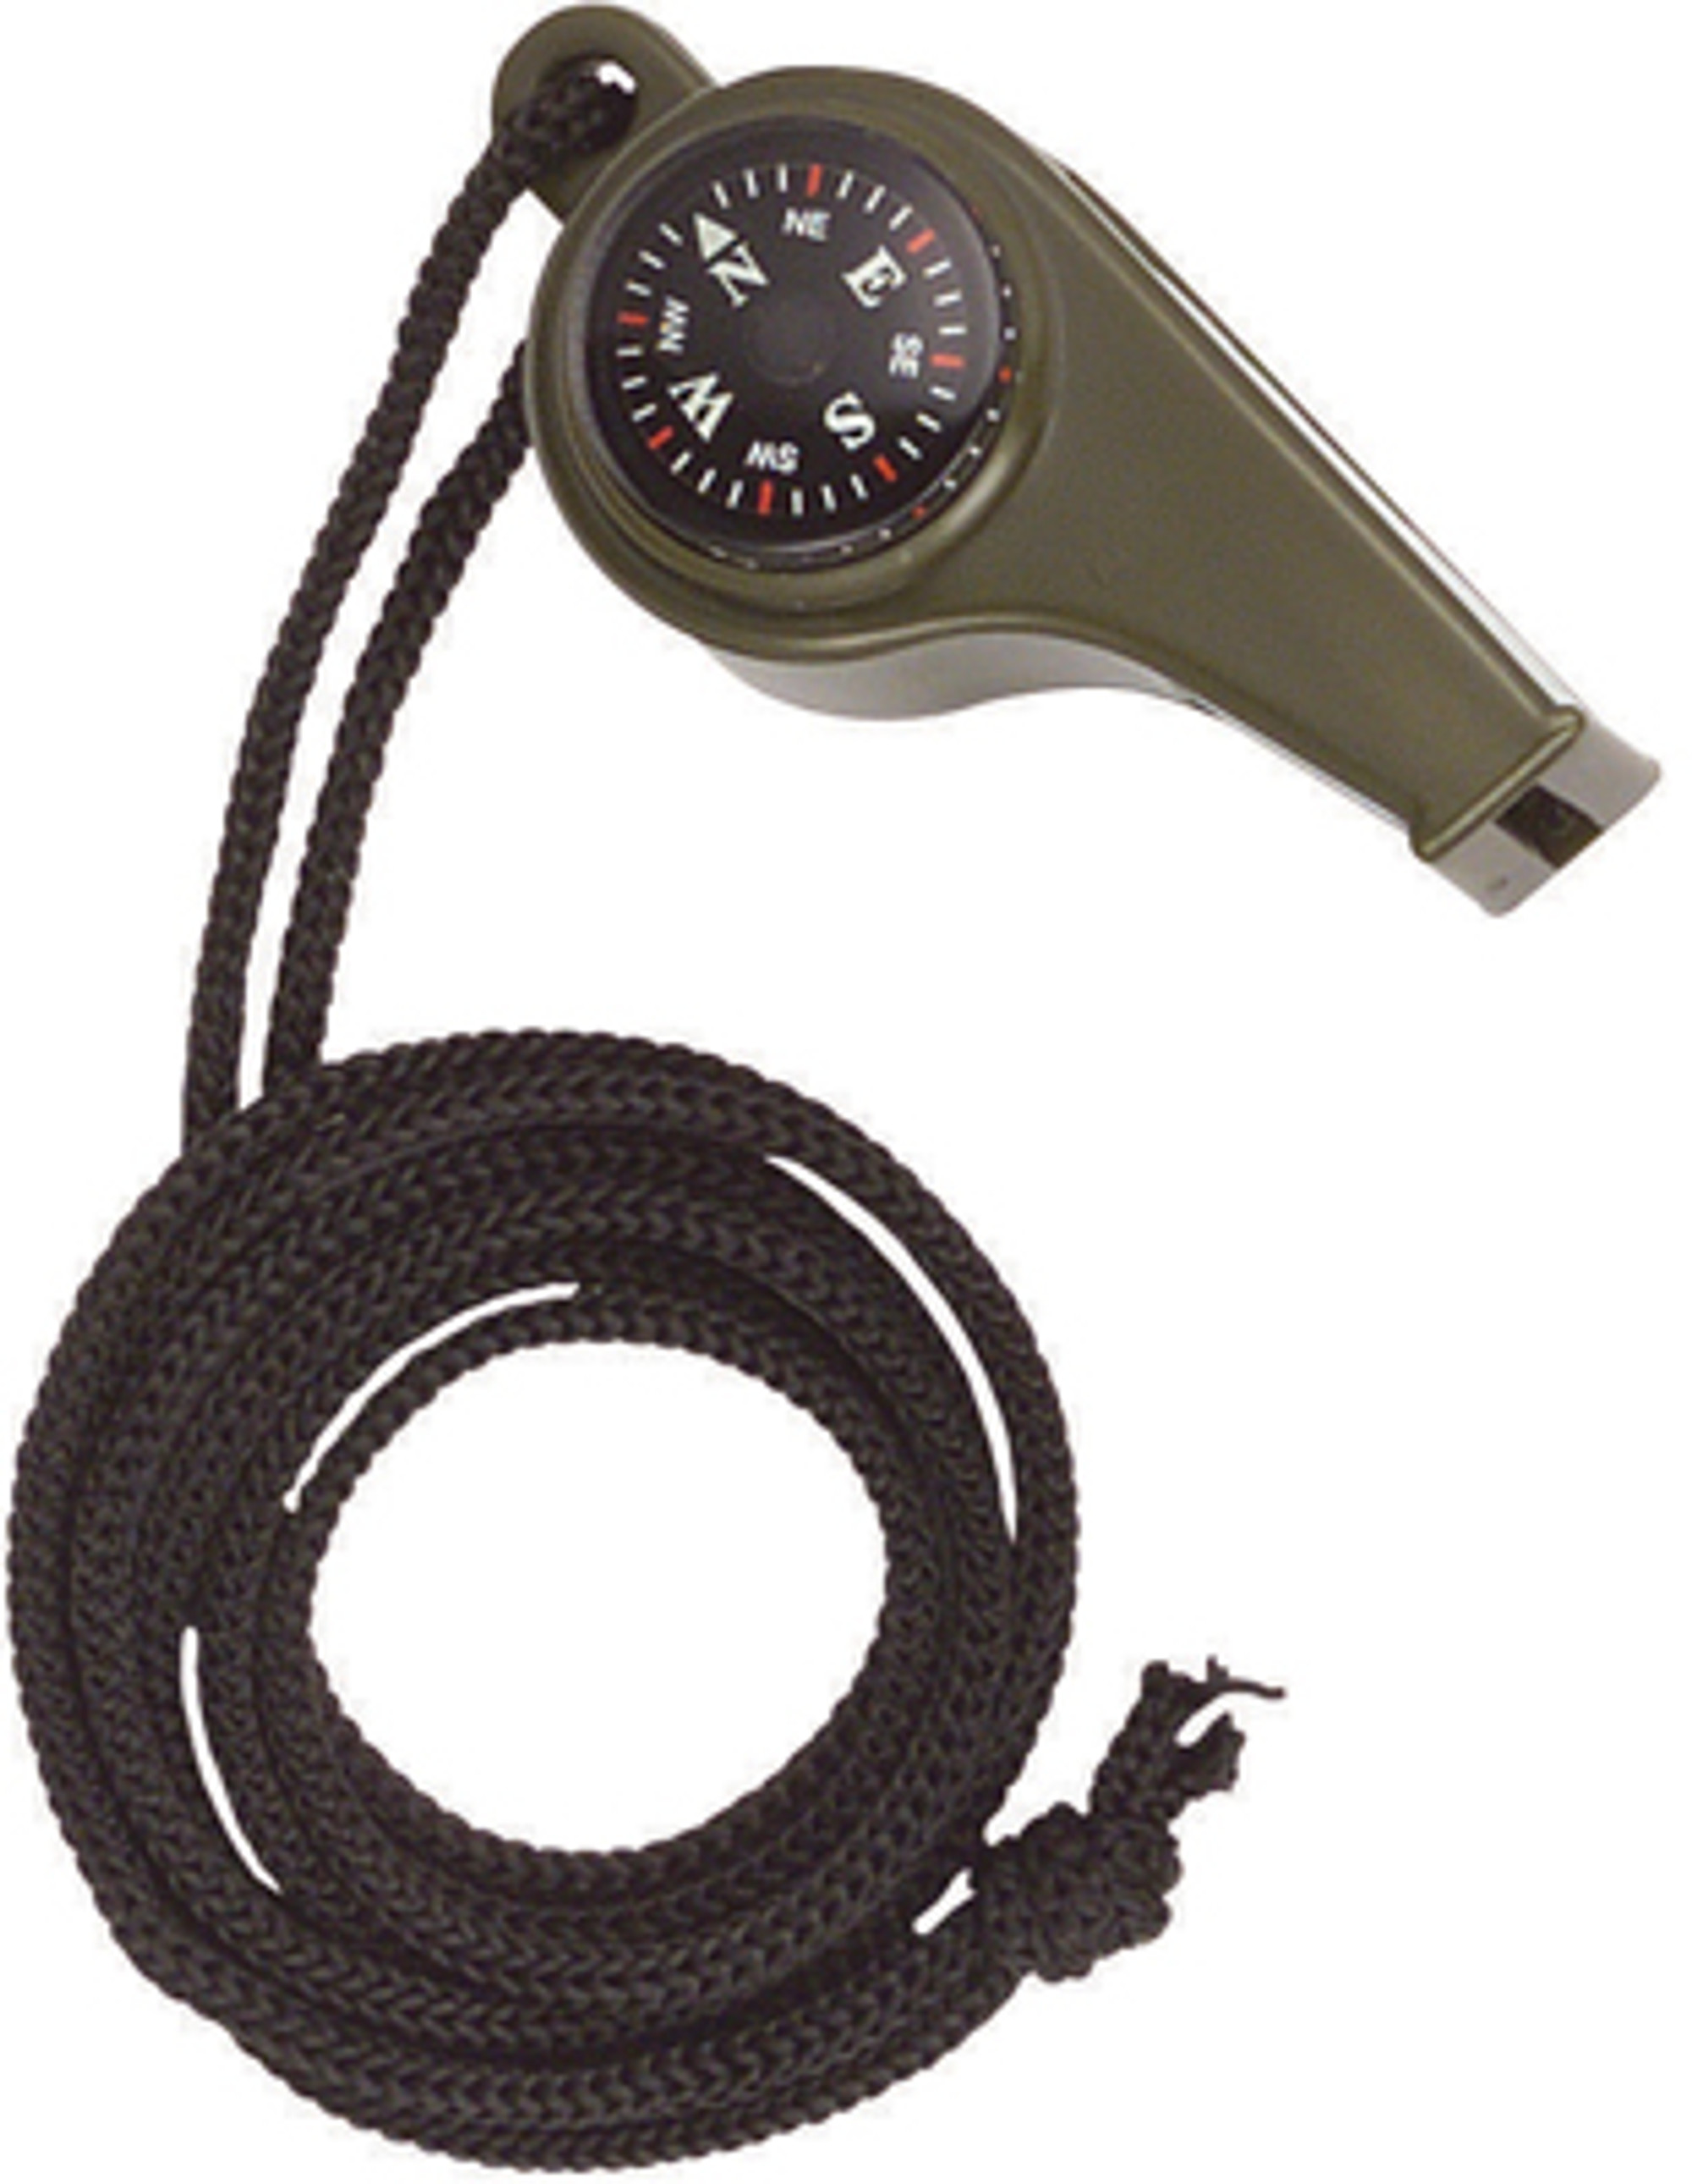 Rothco 3-1 Super Whistle with Compass & Thermometer - Olive Drab